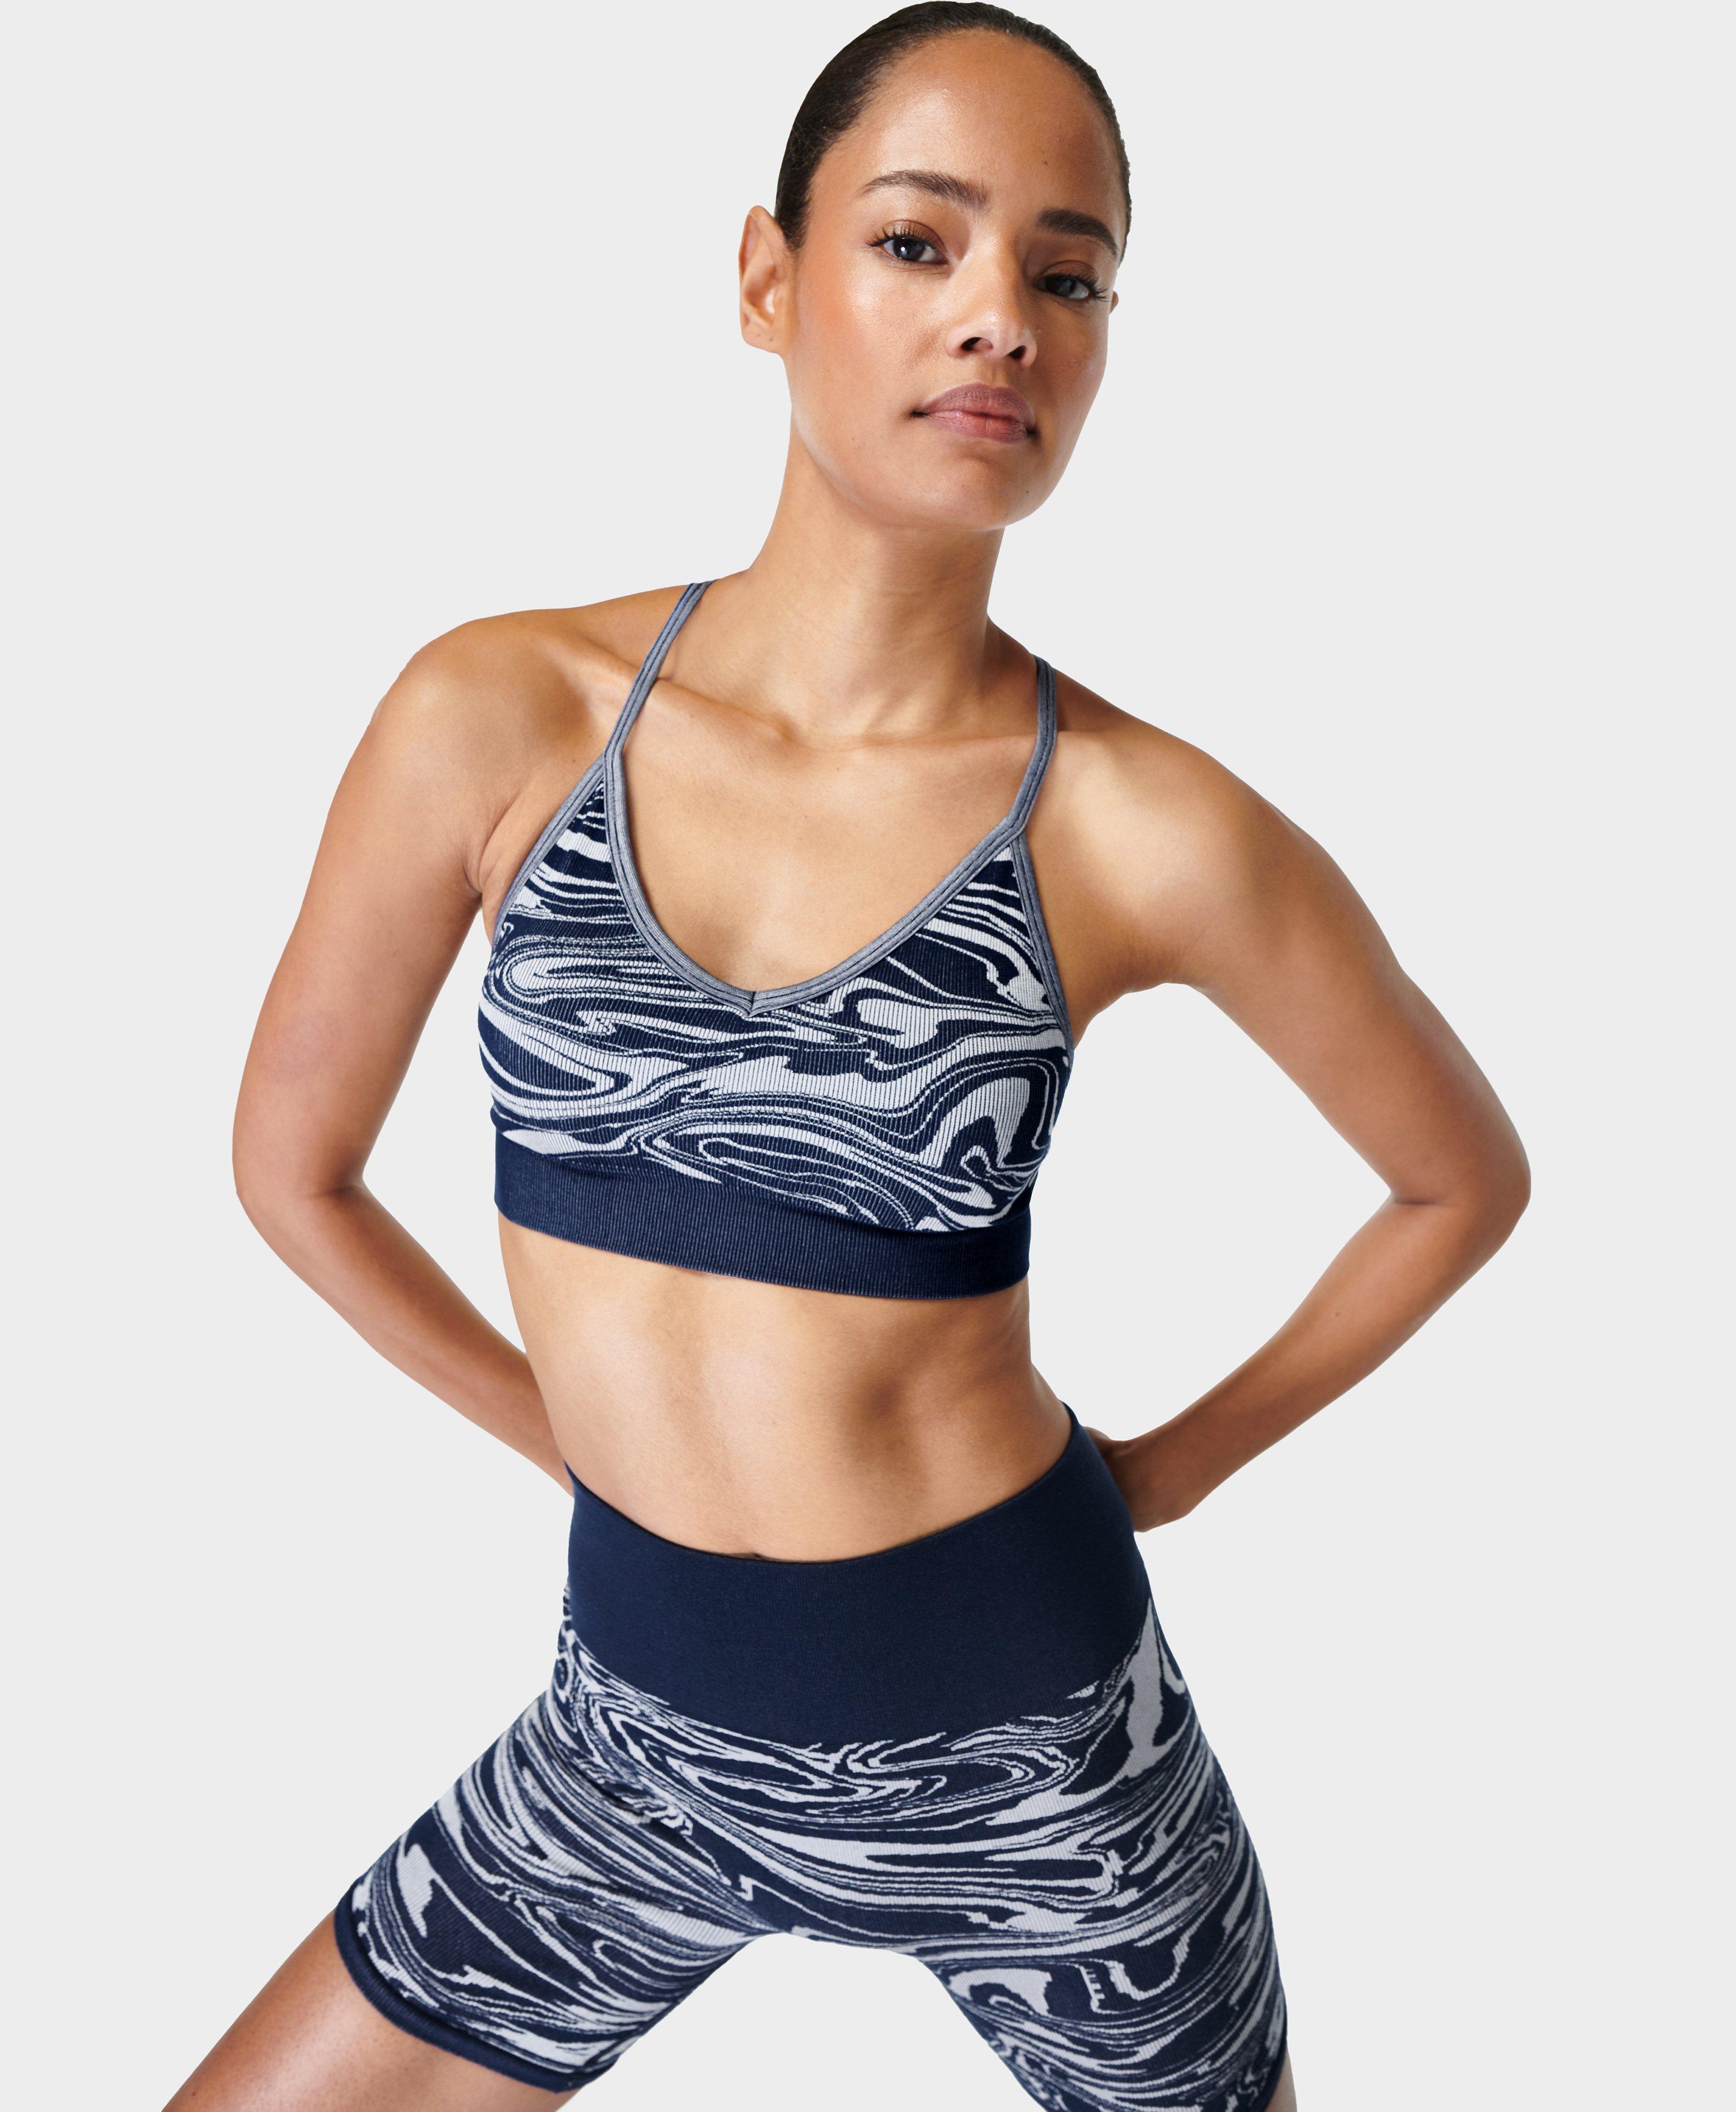 Sweaty Betty's Sale Is Taking 50% Off Best-Sellers Today Only